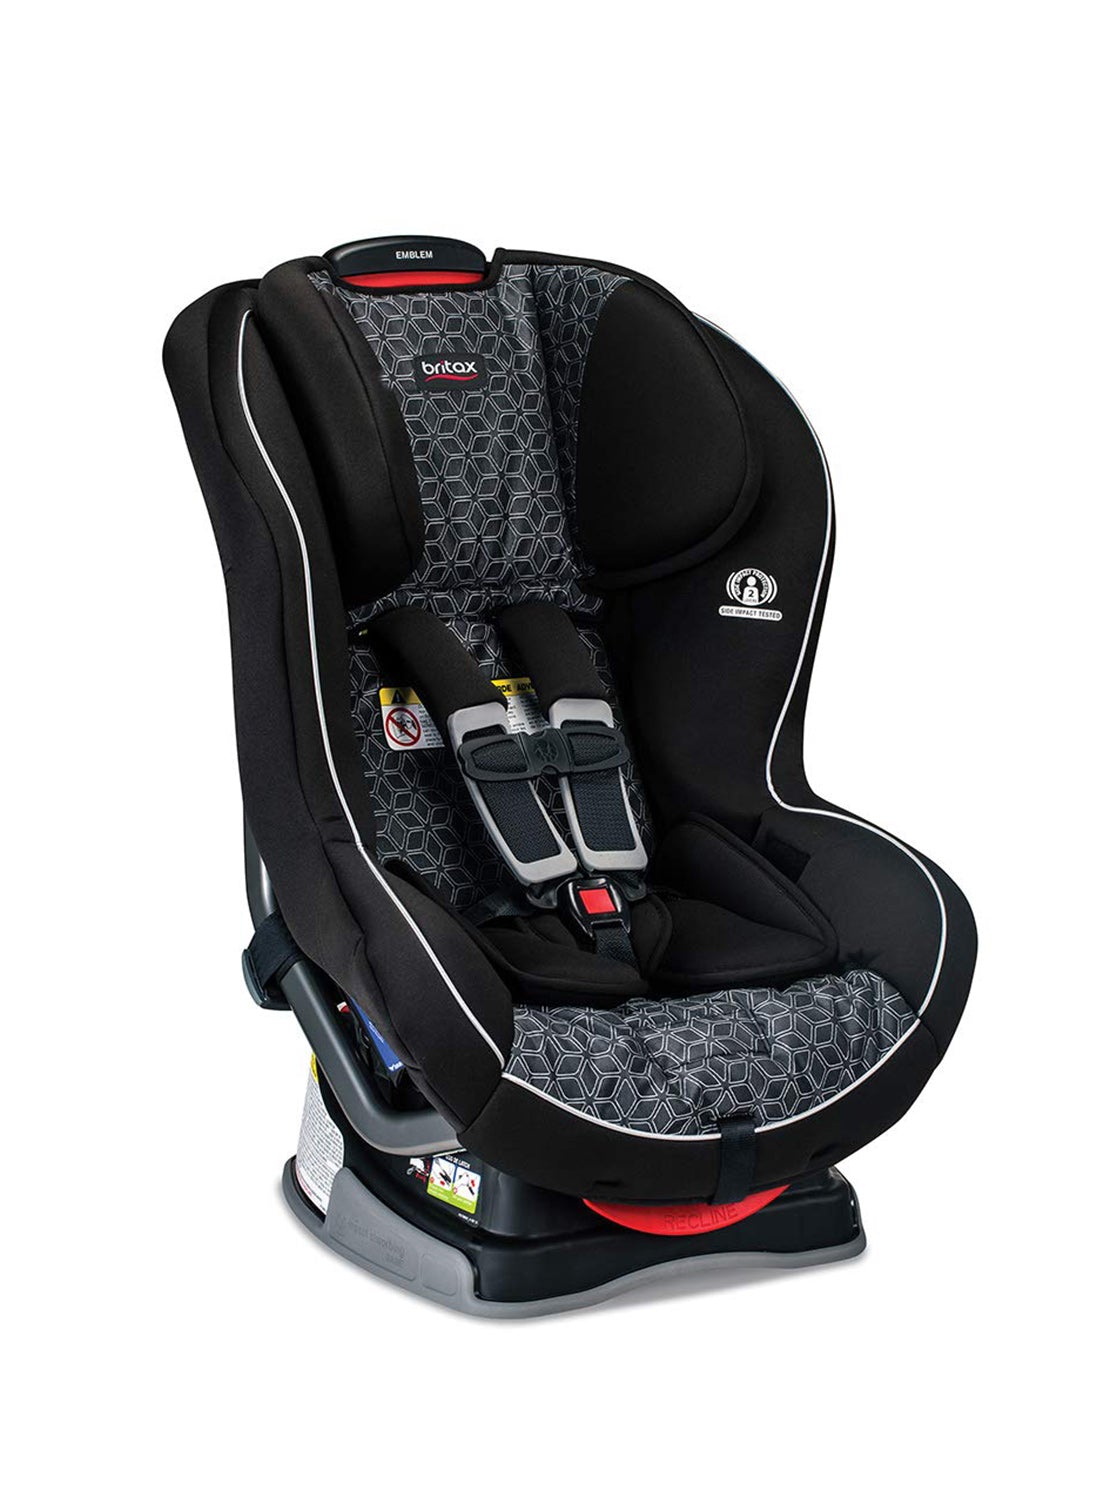 BRITAX Emblem 3 Stage Convertible Car Seat - ANB Baby -$100 - $300